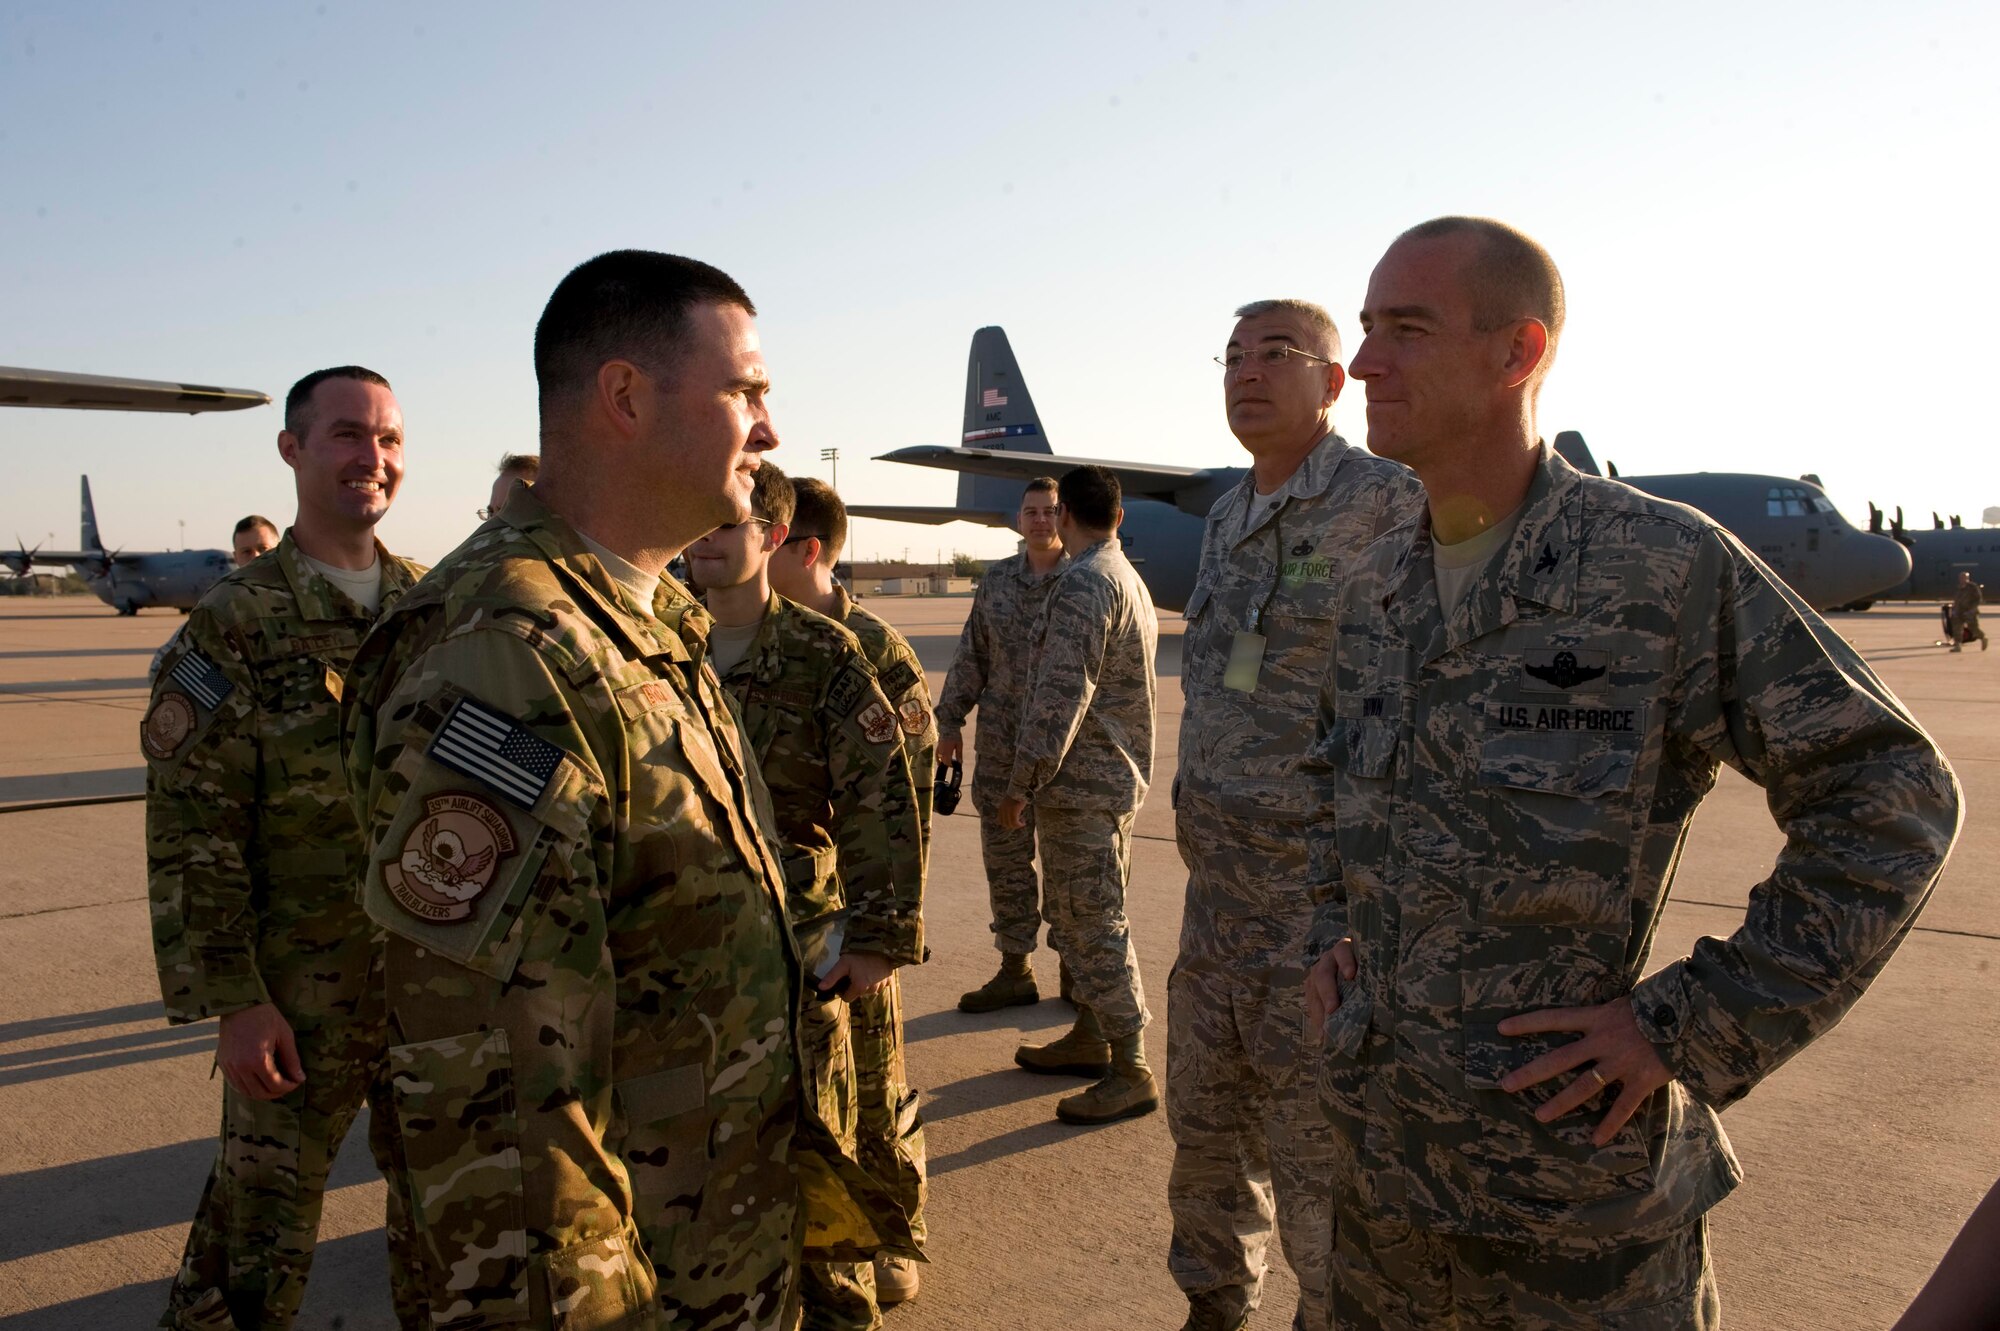 U.S. Air Force Lt. Col. Michael Brock, left, 39th Airlift Squadron commander, receives final words of encouragement from Col. Jeffrey Brown, 317th Airlift Group commander, Sept. 3, 2013, at Dyess Air Force Base, Texas.  The 39th Airlift Group recently deployed more than 180 Airmen in support of U.S. Central Command missions. (U.S. Air Force photo by Airman 1st Class Kylsee Wisseman)